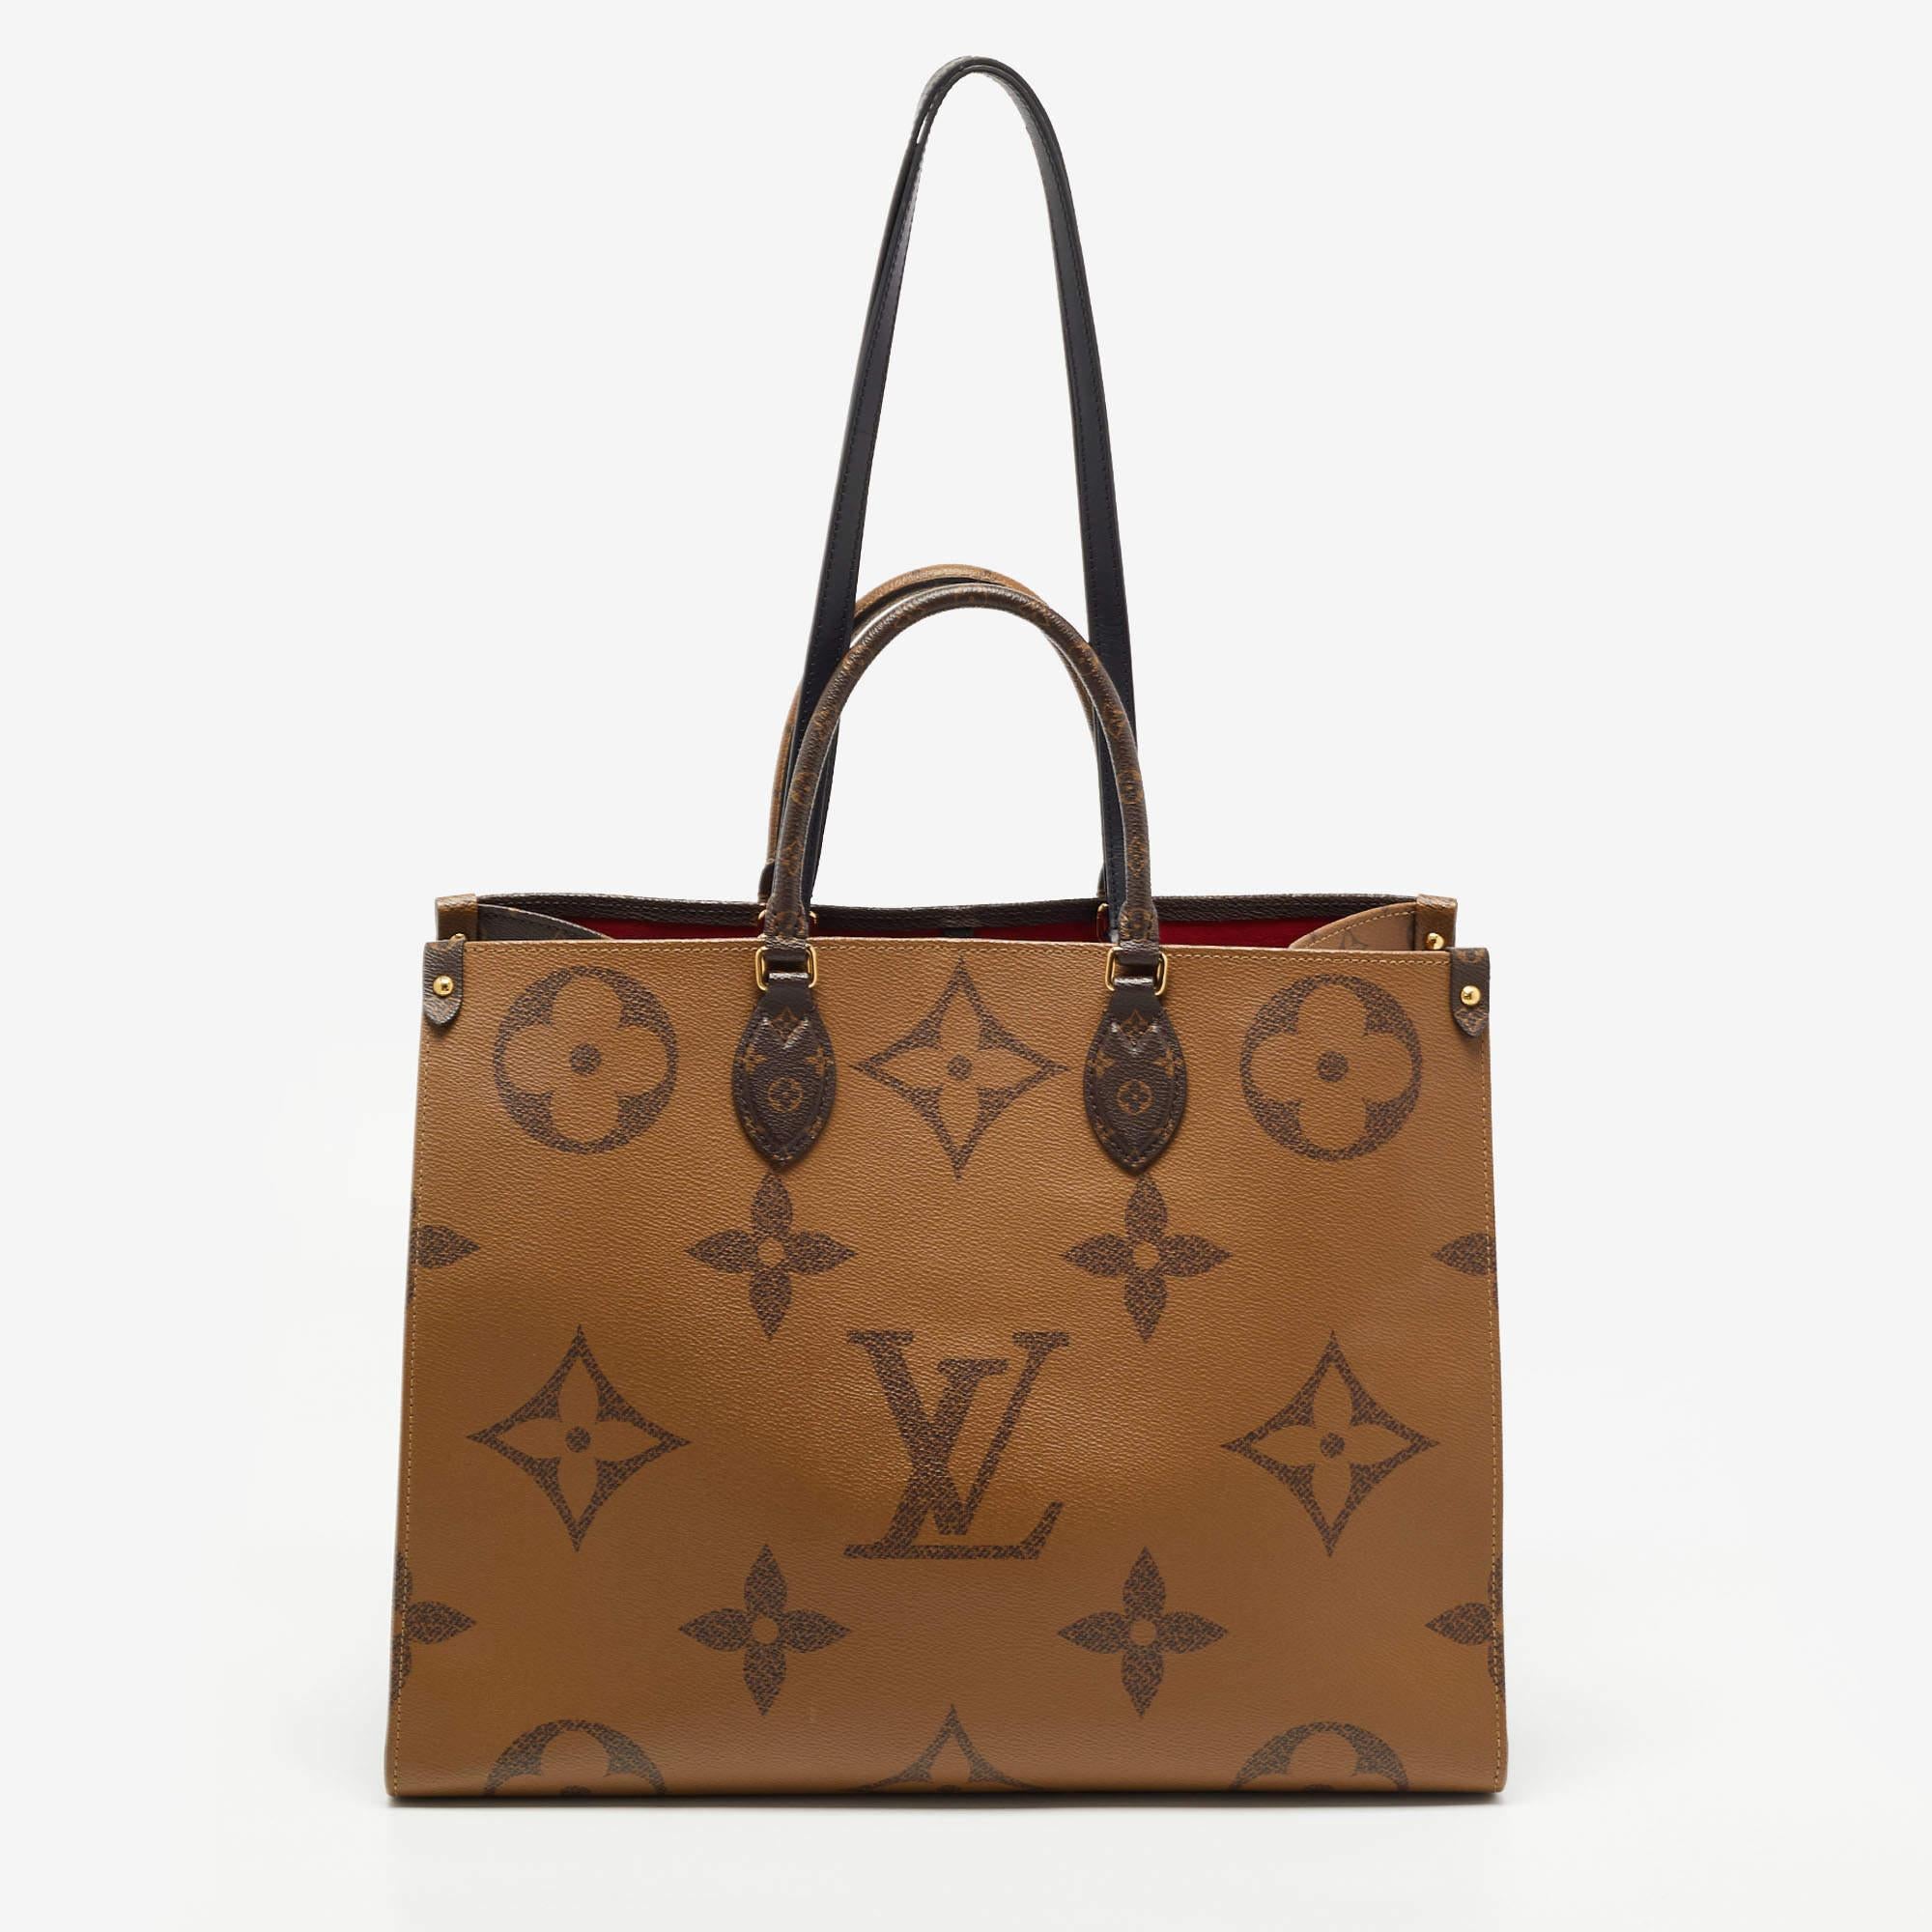 This Onthego bag easily delivers on the sophisticated charm of Louis Vuitton. This creation has been beautifully crafted from Monogram Giant canvas and styled with Monogram & Monogram Reverse on the sides. The interior is lined with canvas and sized